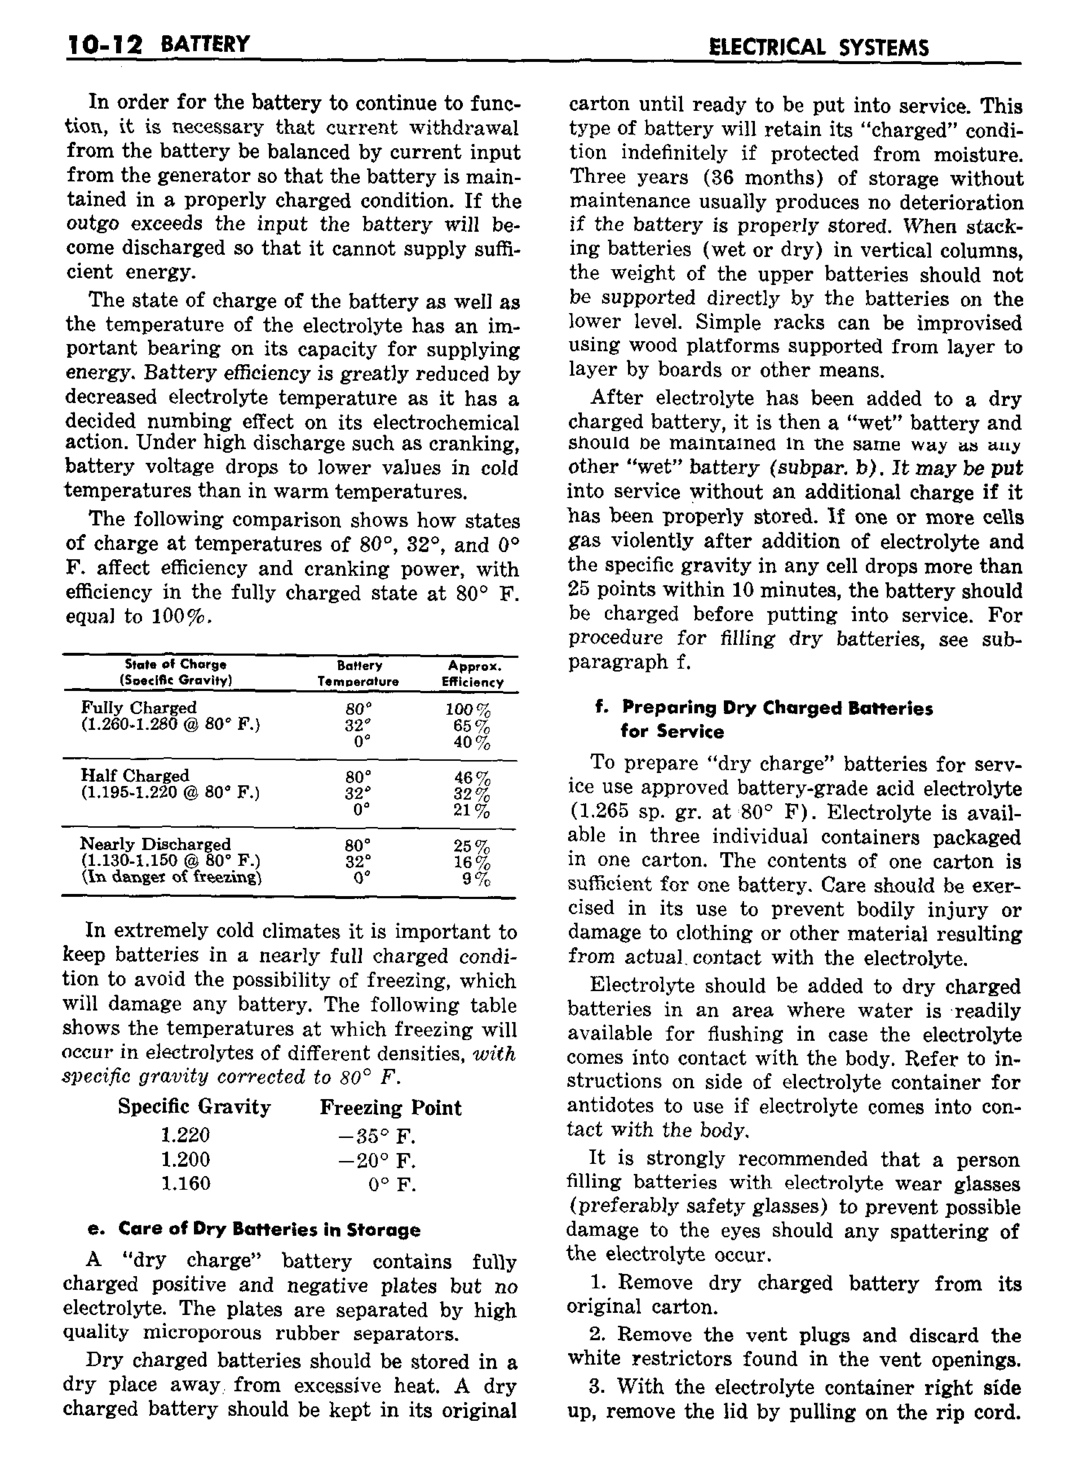 n_11 1959 Buick Shop Manual - Electrical Systems-012-012.jpg